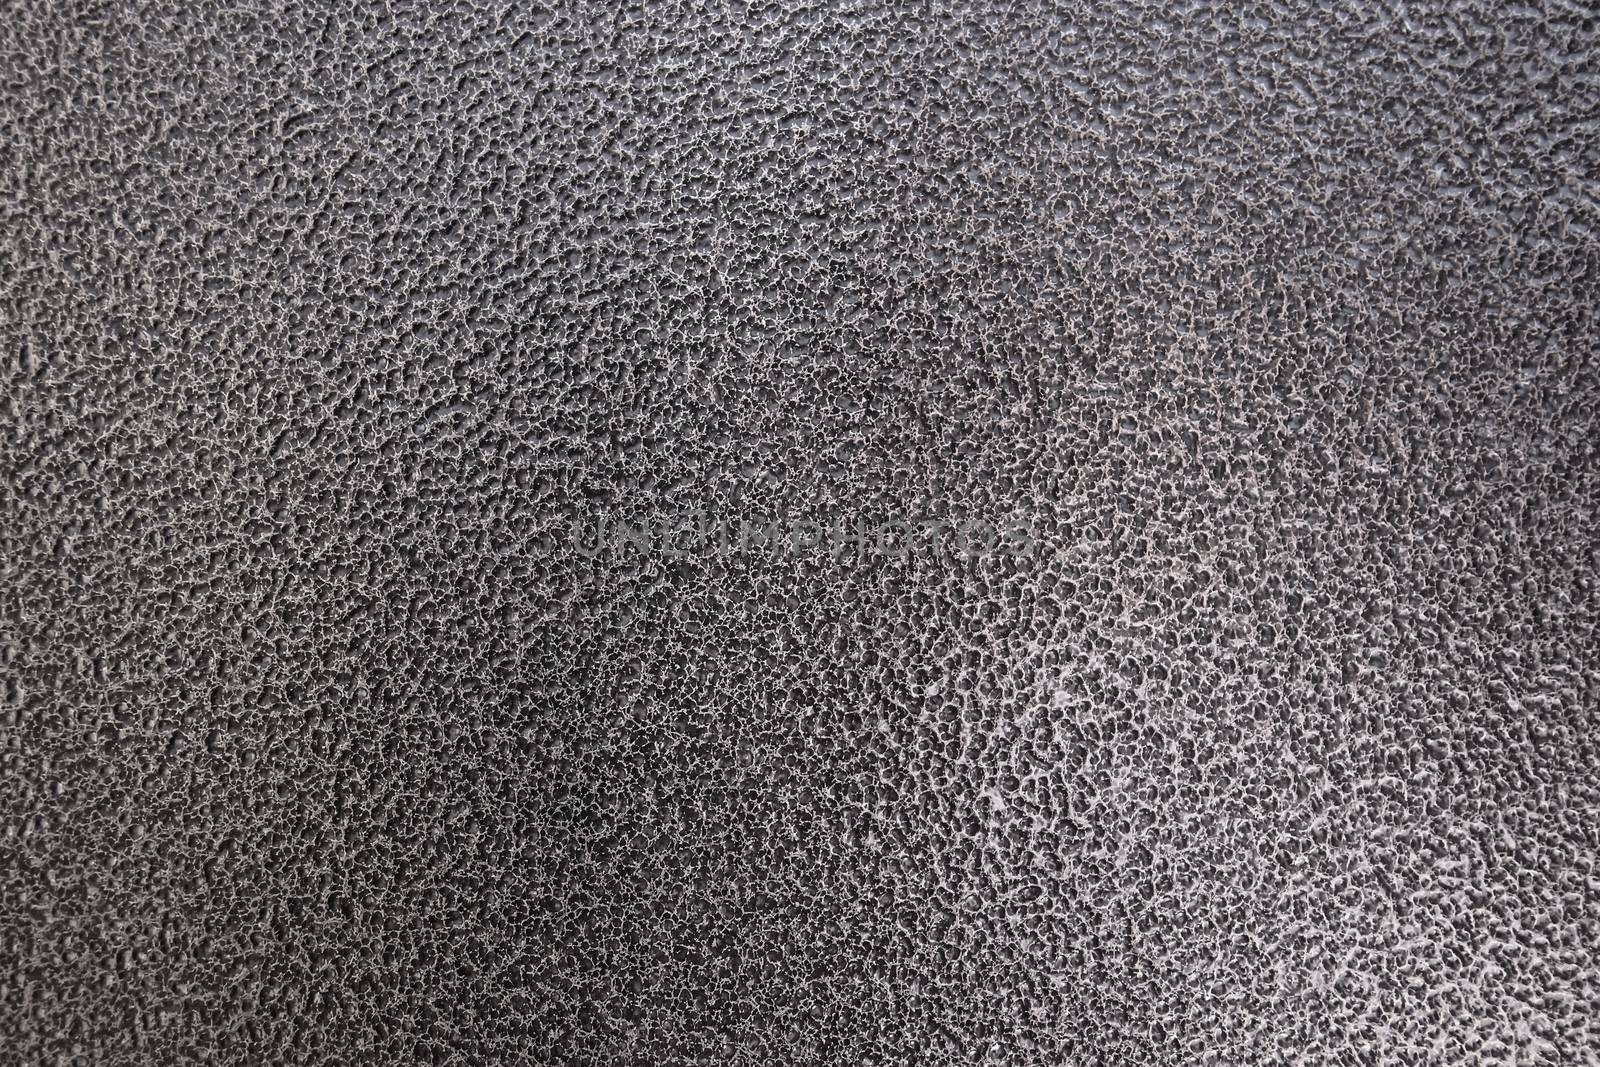 metal texture background, for backgrounds and textures, metal do by KoliadzynskaIryna